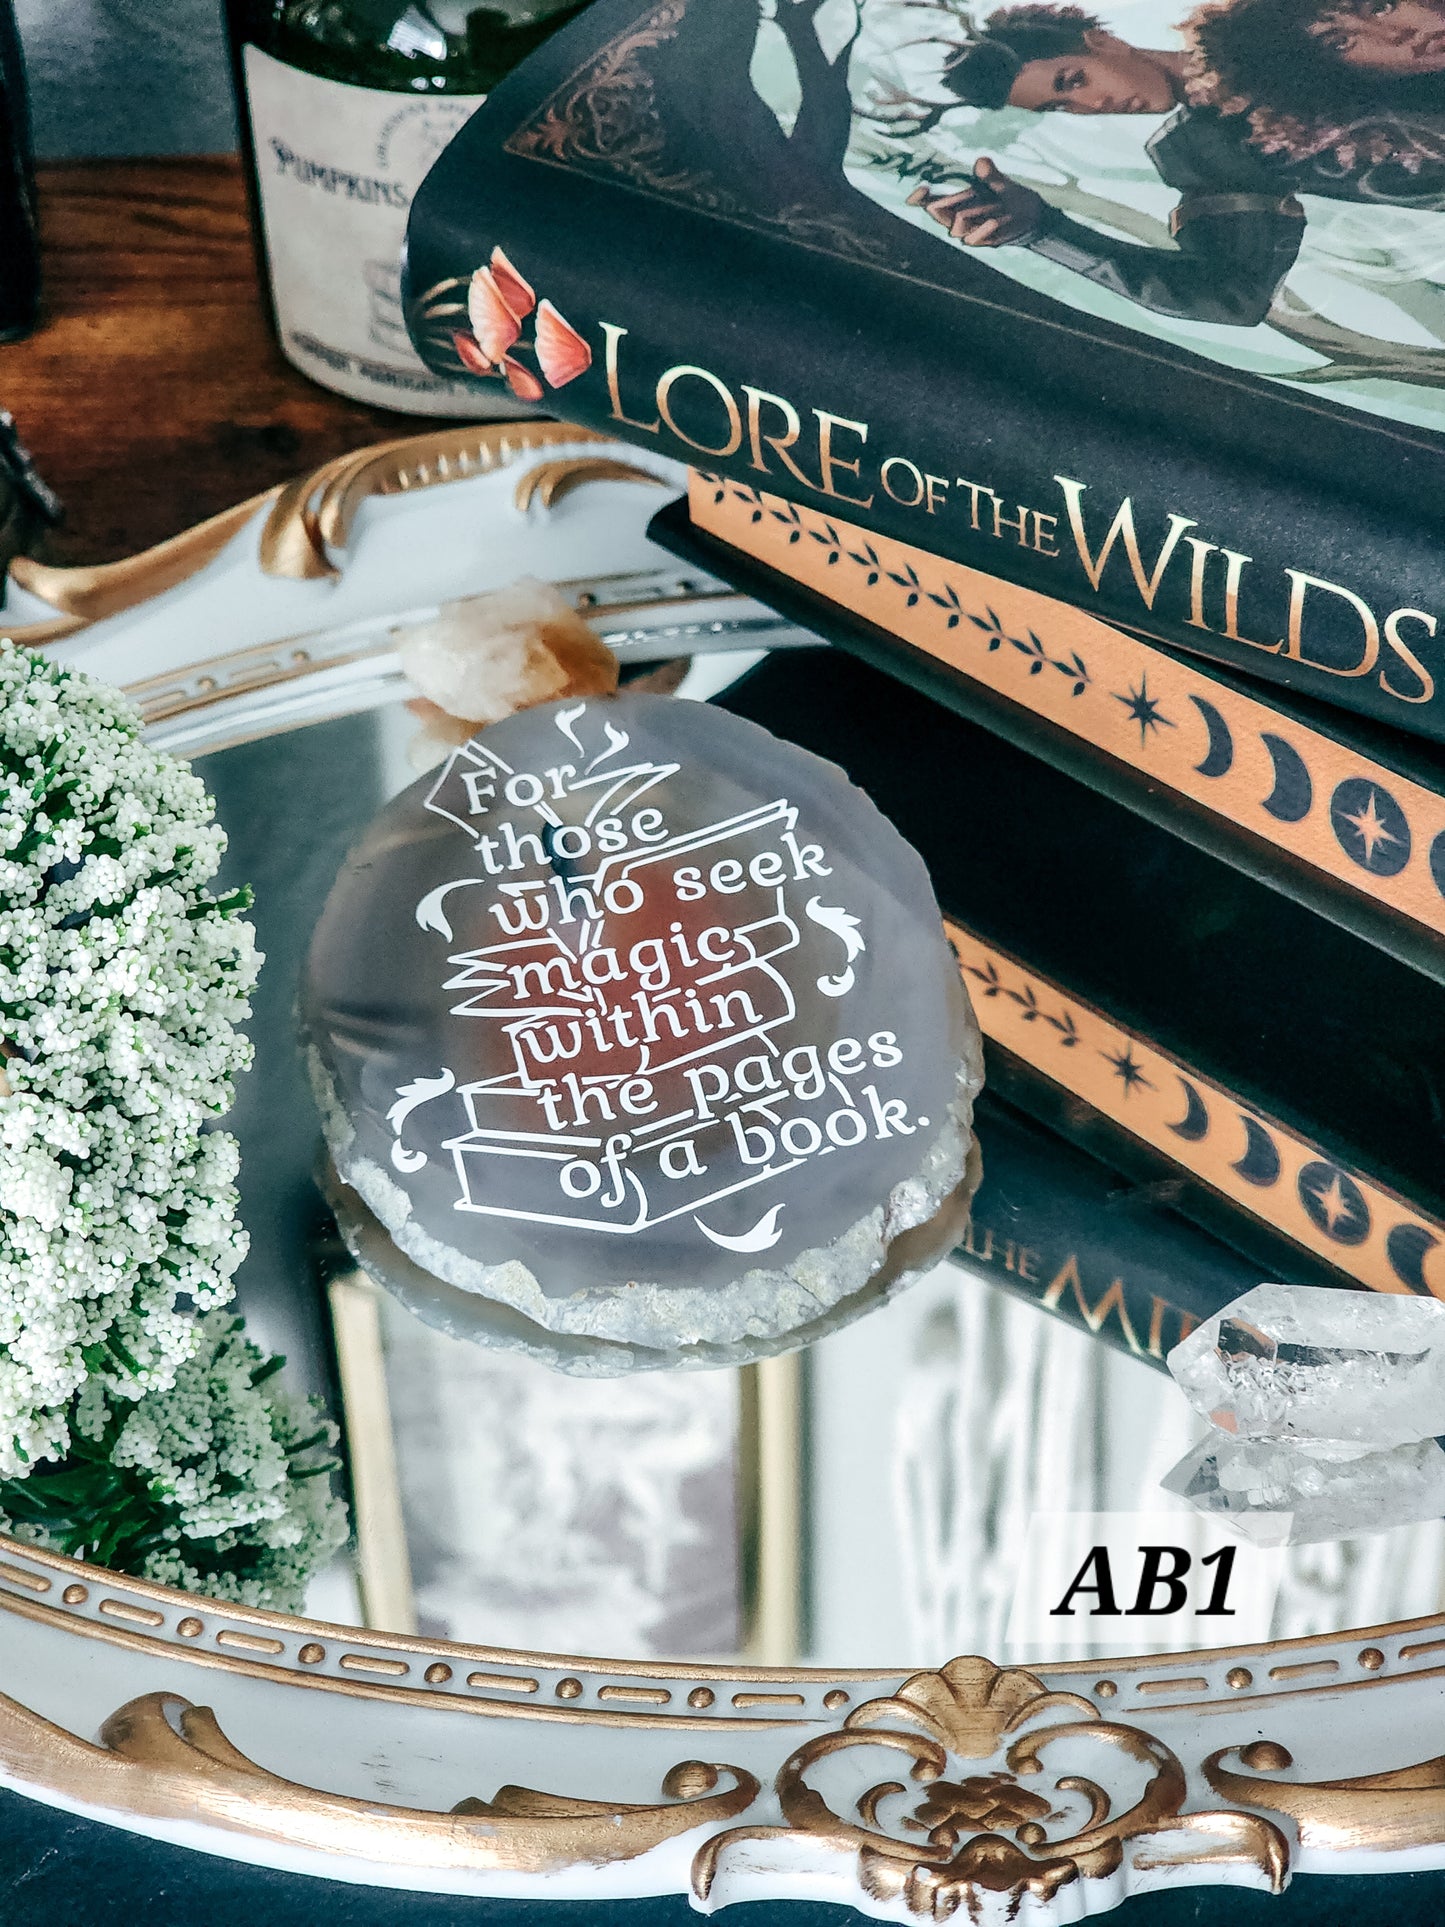 " For those who seek magic " | Amber/ Red Agate Slice Shelf Sitter | Lore Of the Wilds by Analeigh Sbrana